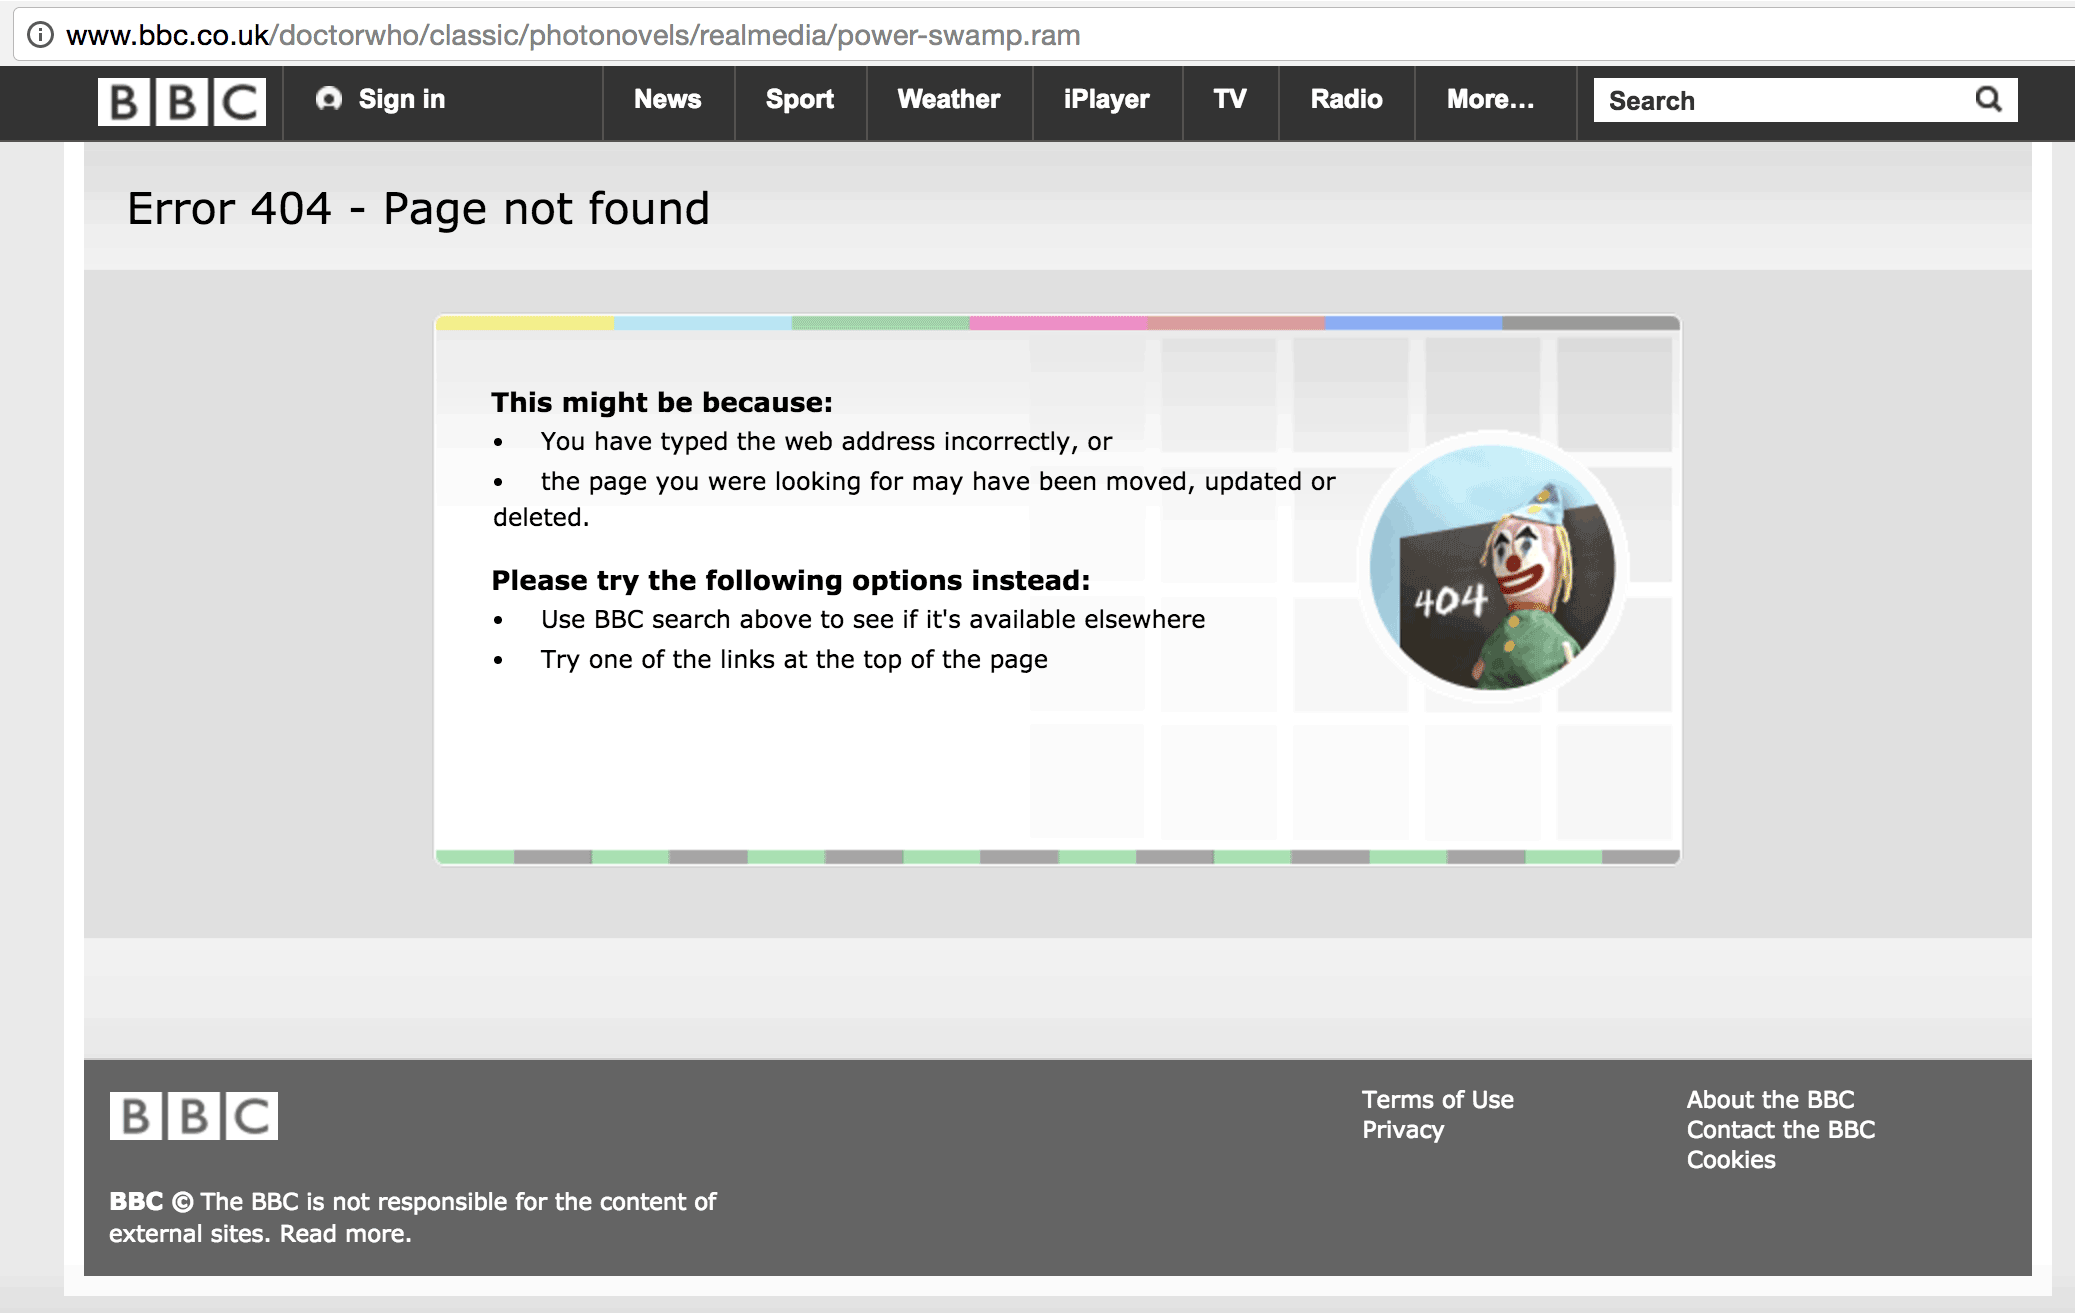 The BBC 404 page